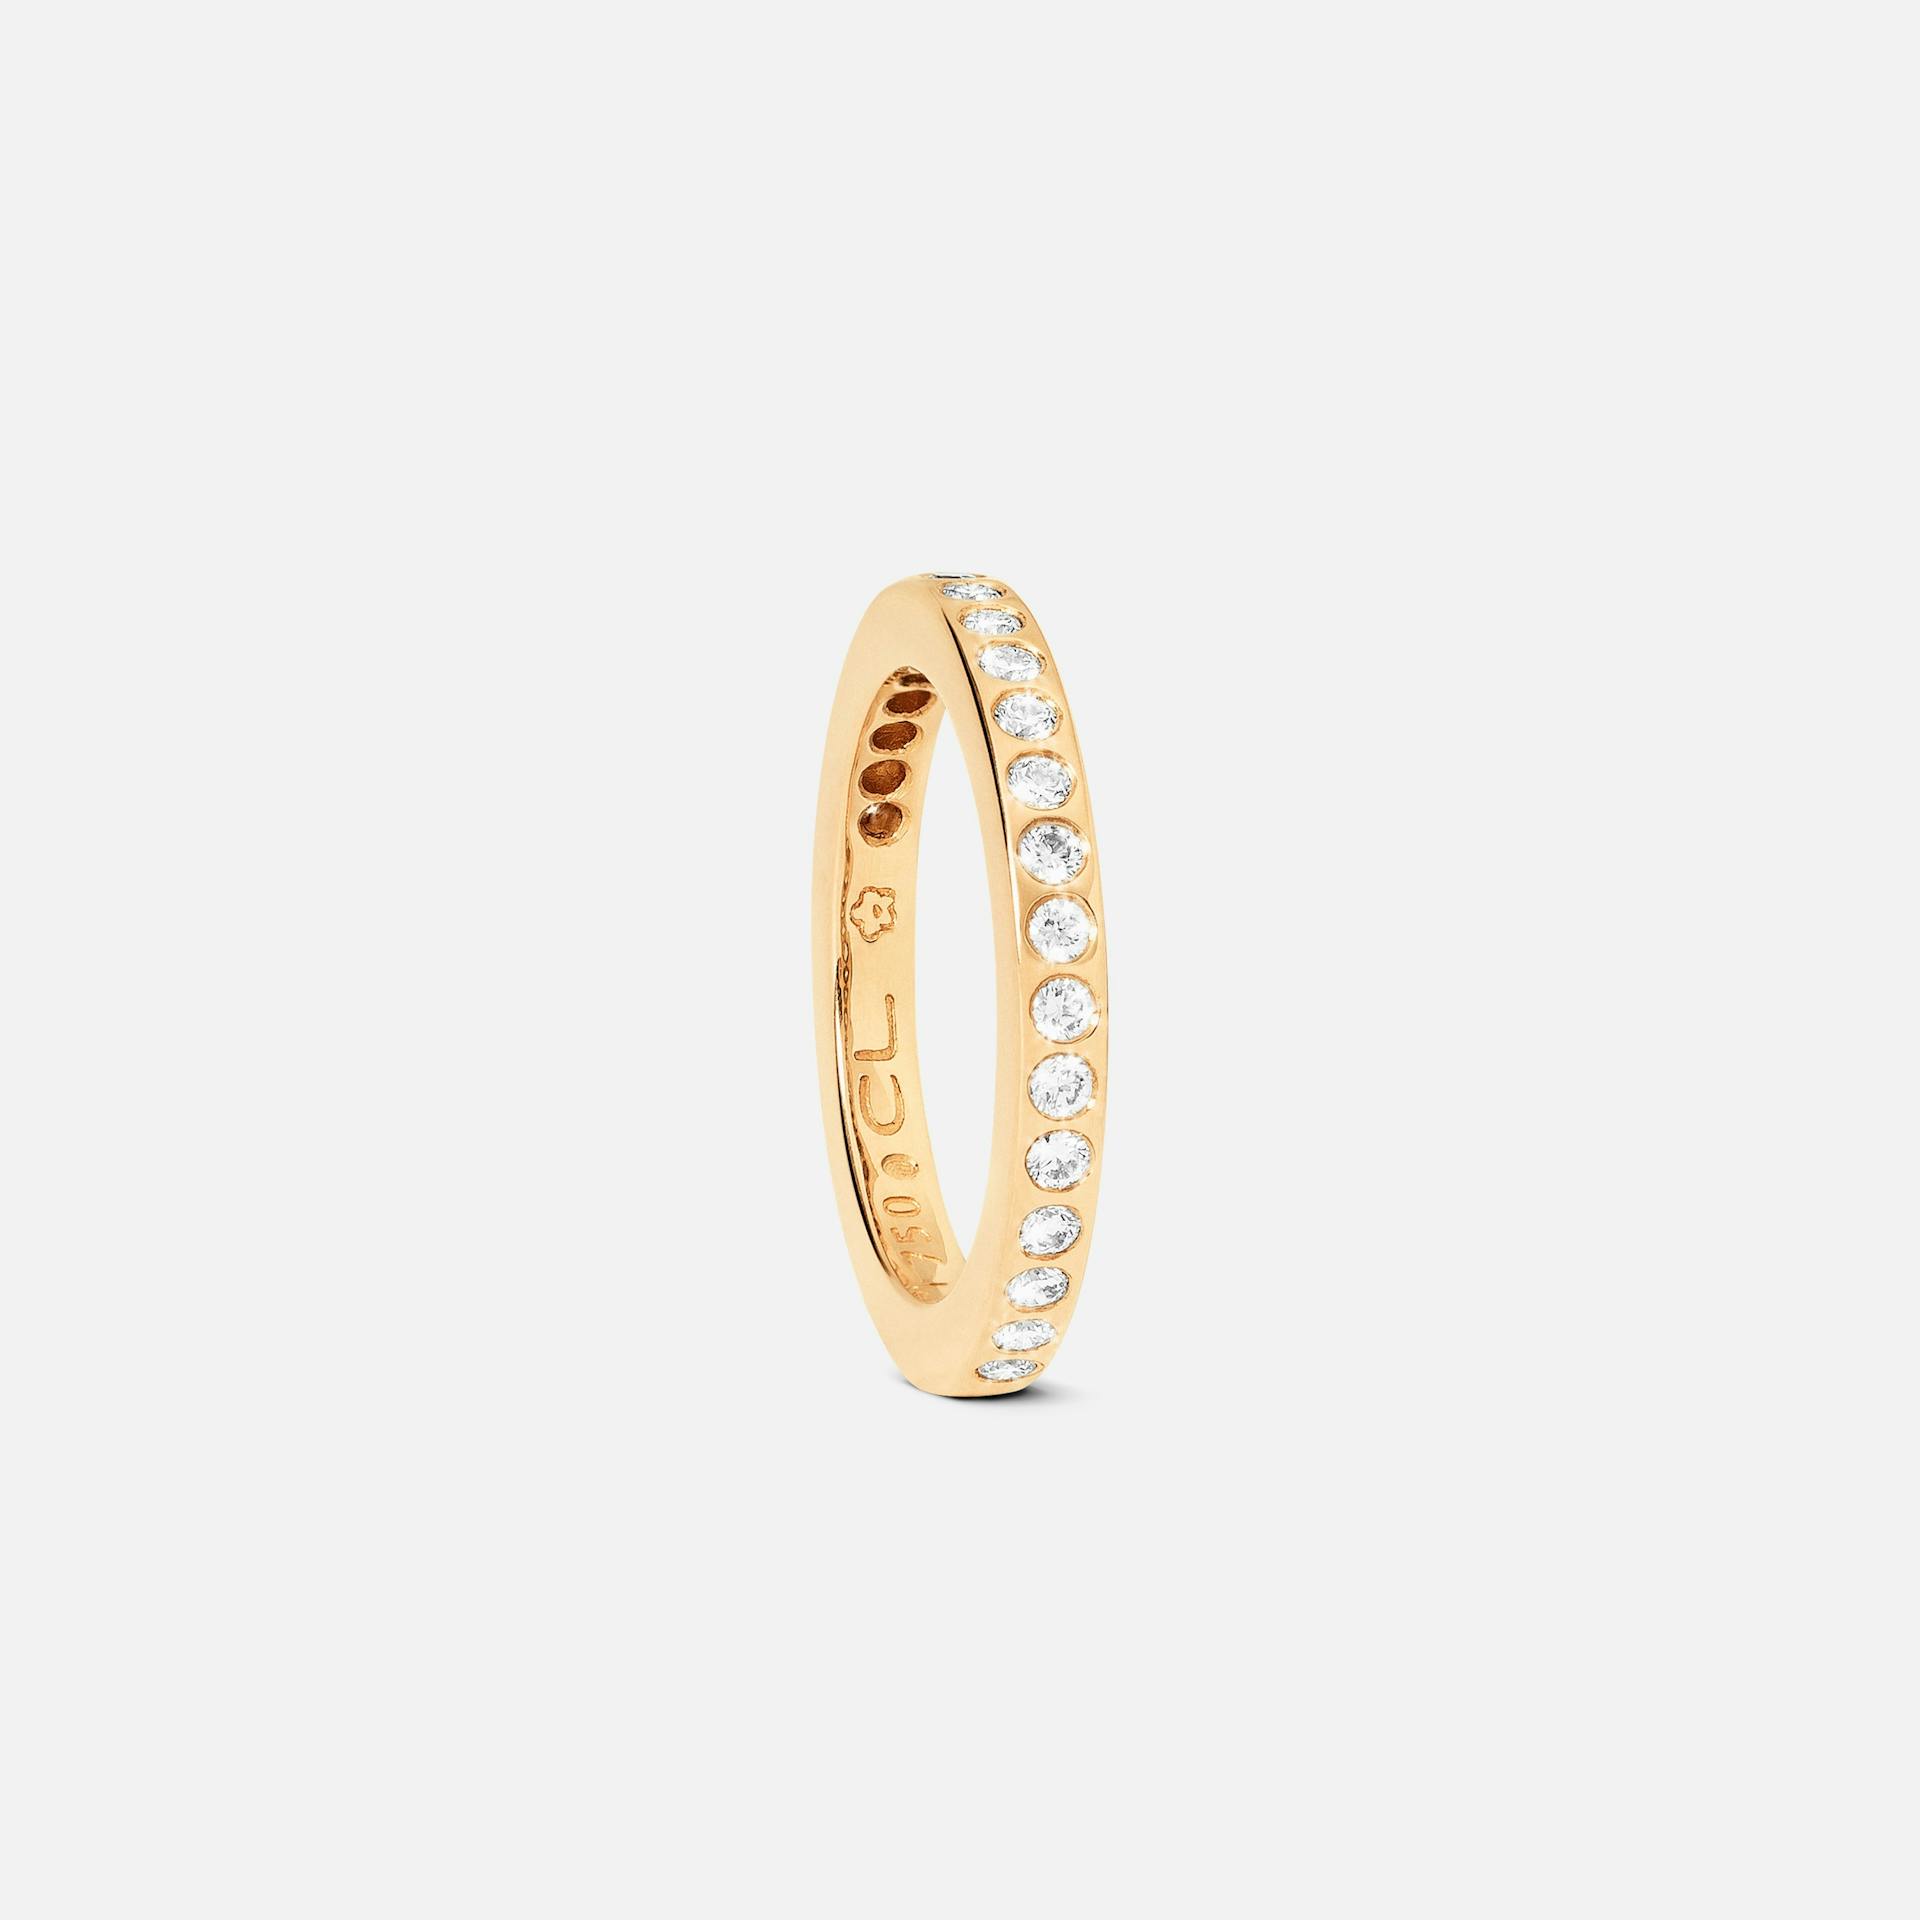 Forever Love ring 18k polished gold with diamonds 0.38-0.46 ct. TW. VS.